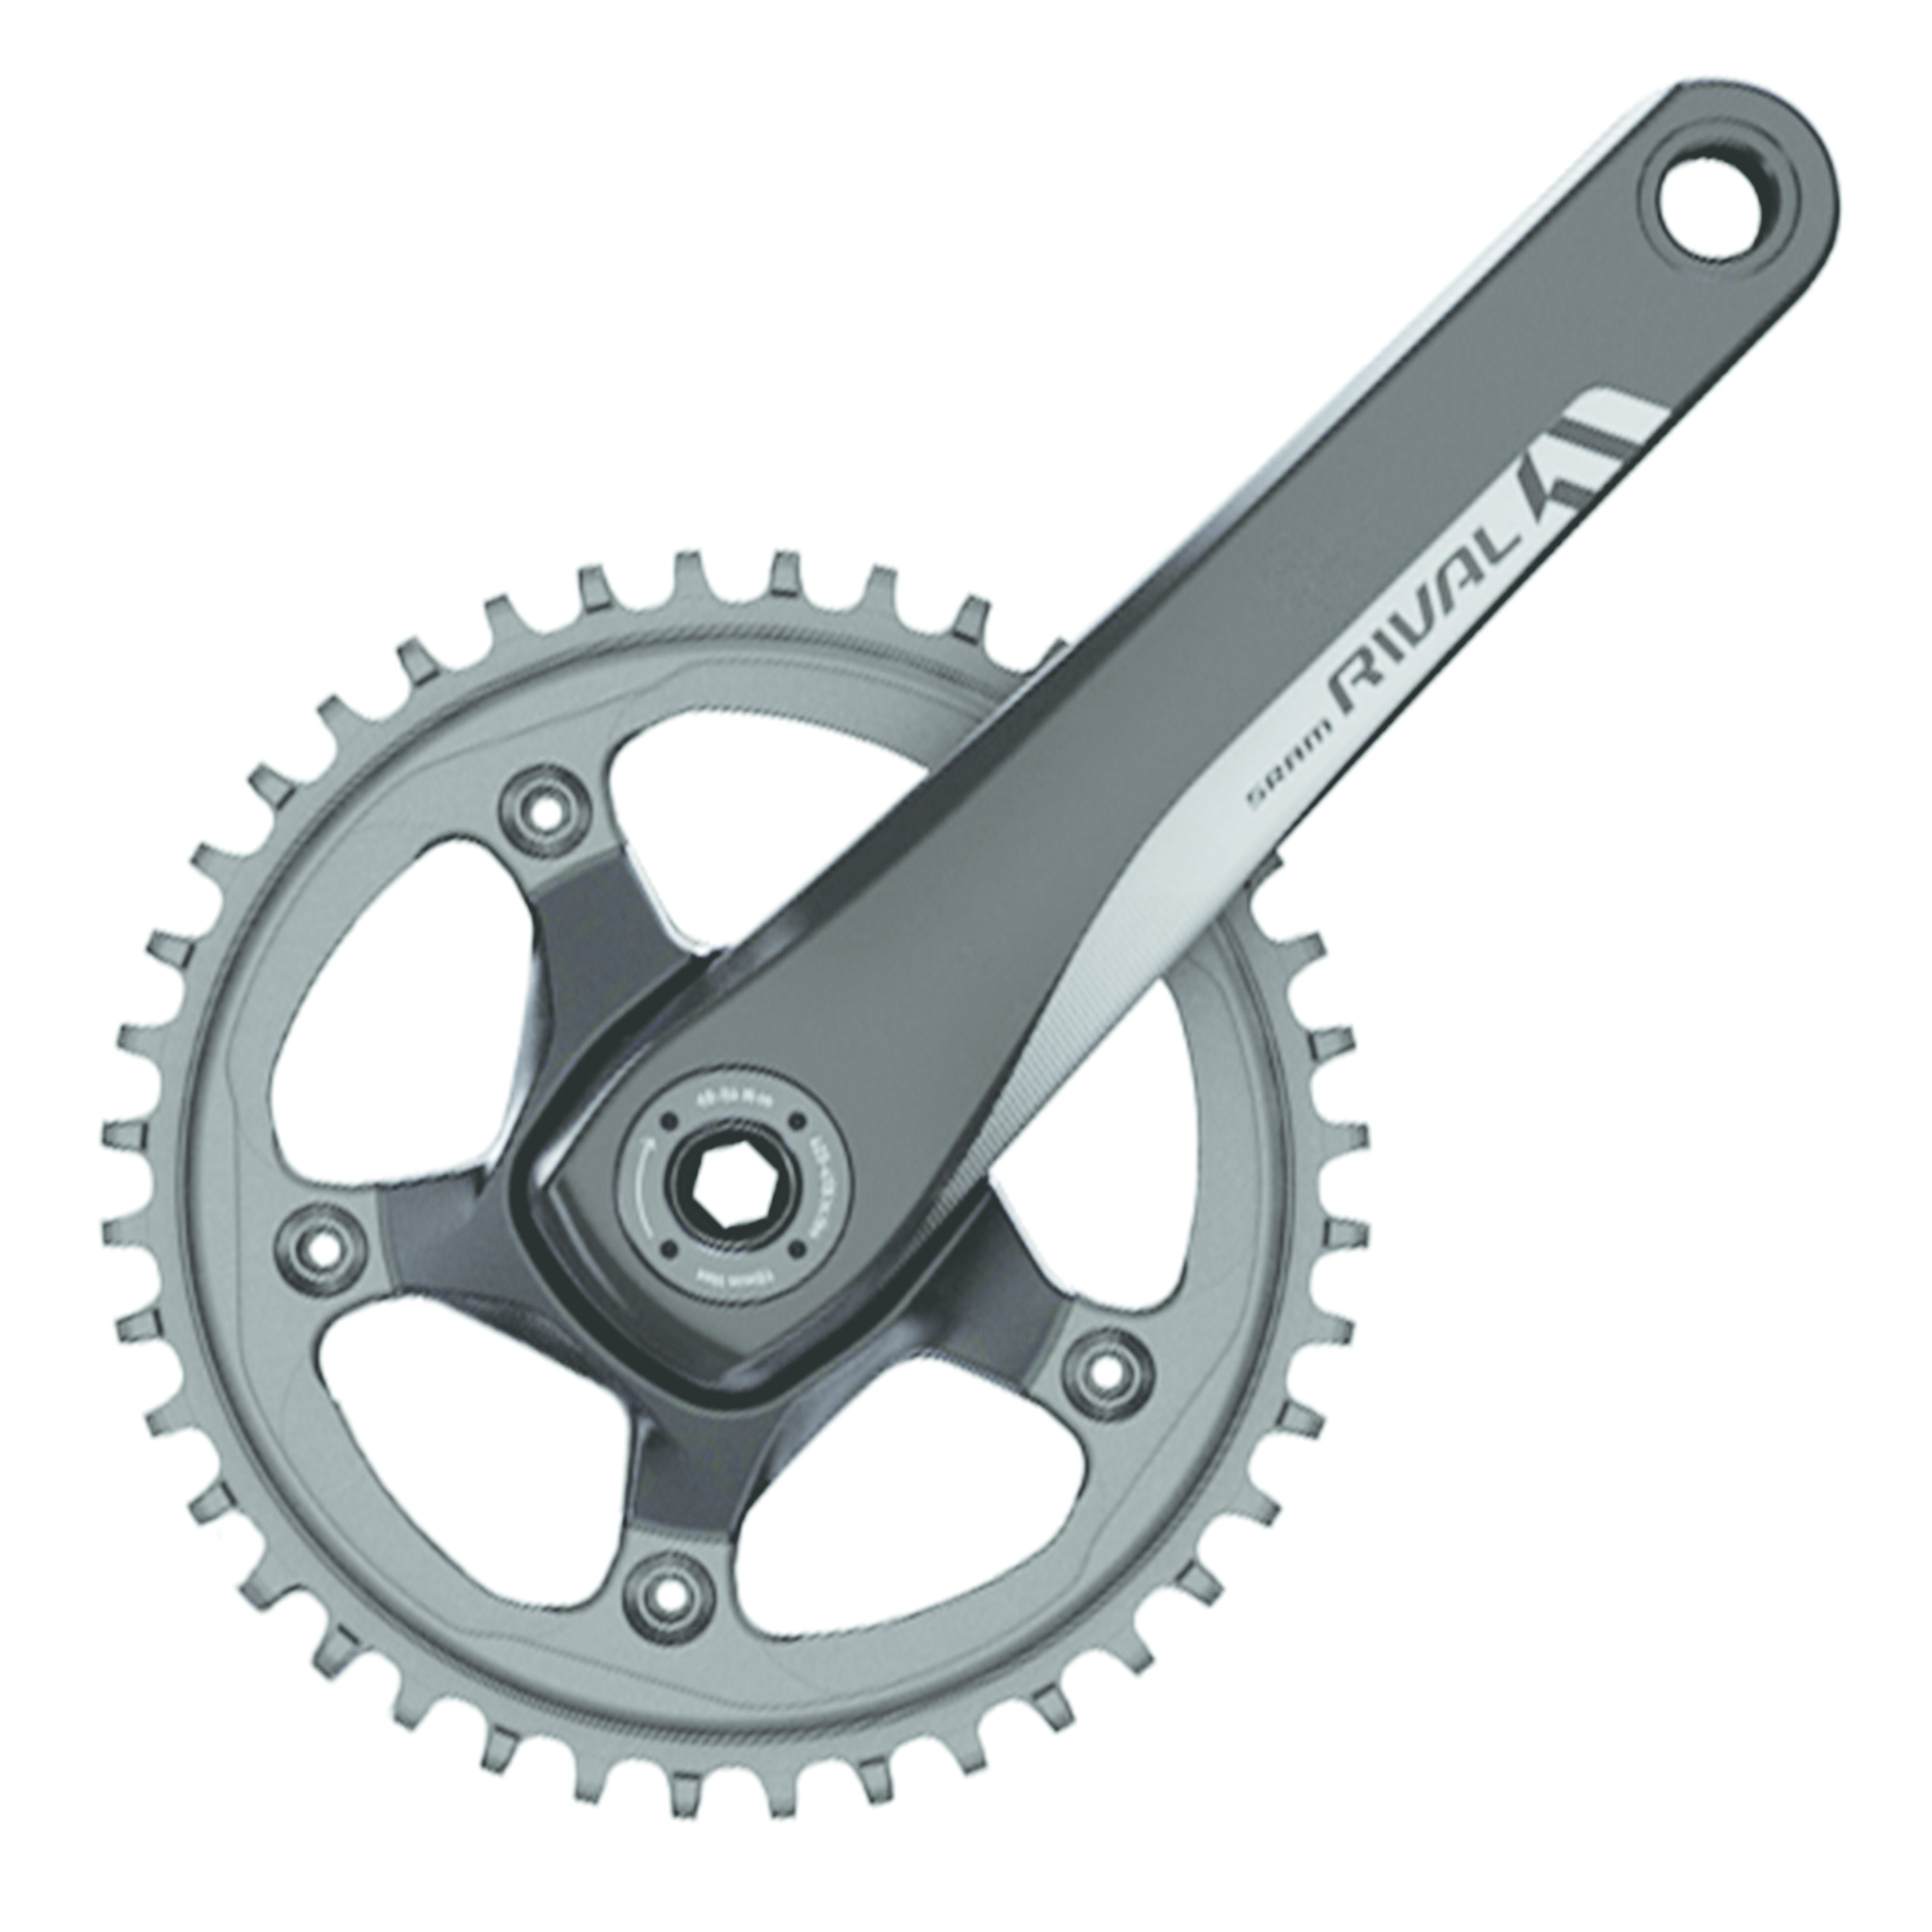 SRAM Rival 1 - 11 Speed Crankset 170mm 50 Tooth 110 BCD 68mm GXP